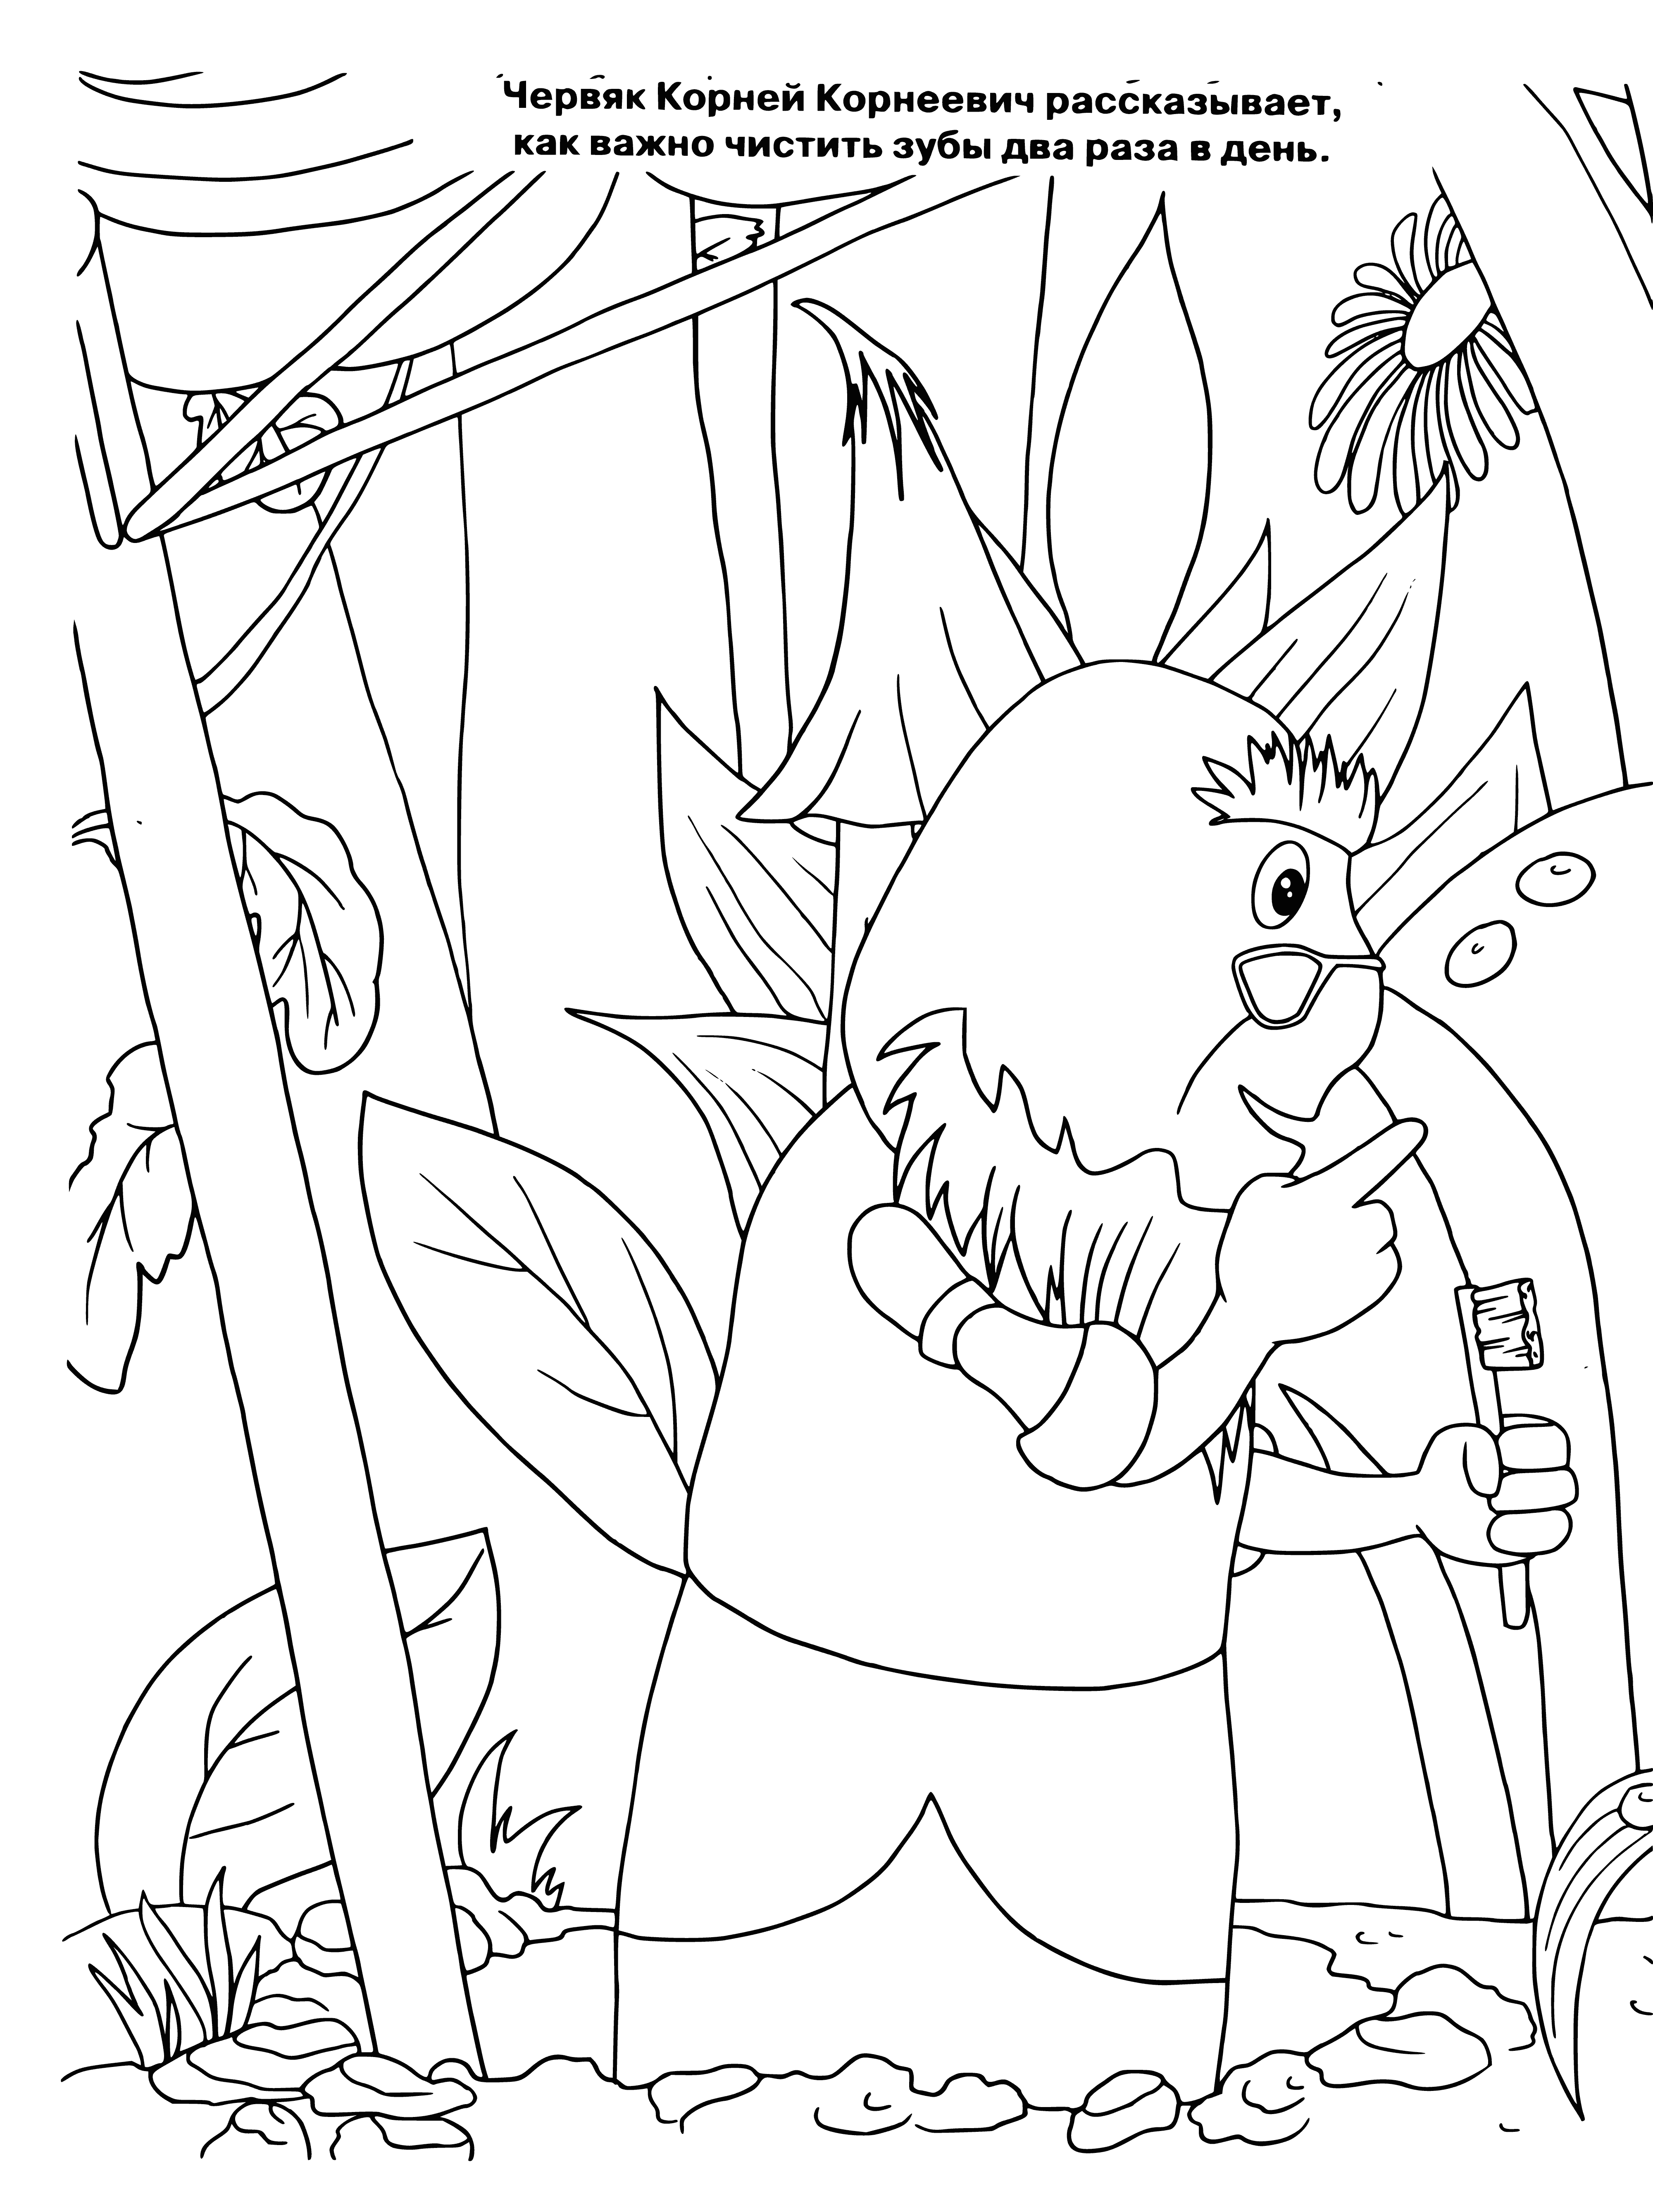 coloring page: Luntik, Korney Korneevich and the Little Blue live in the forest, wearing colorful hats and exploring.